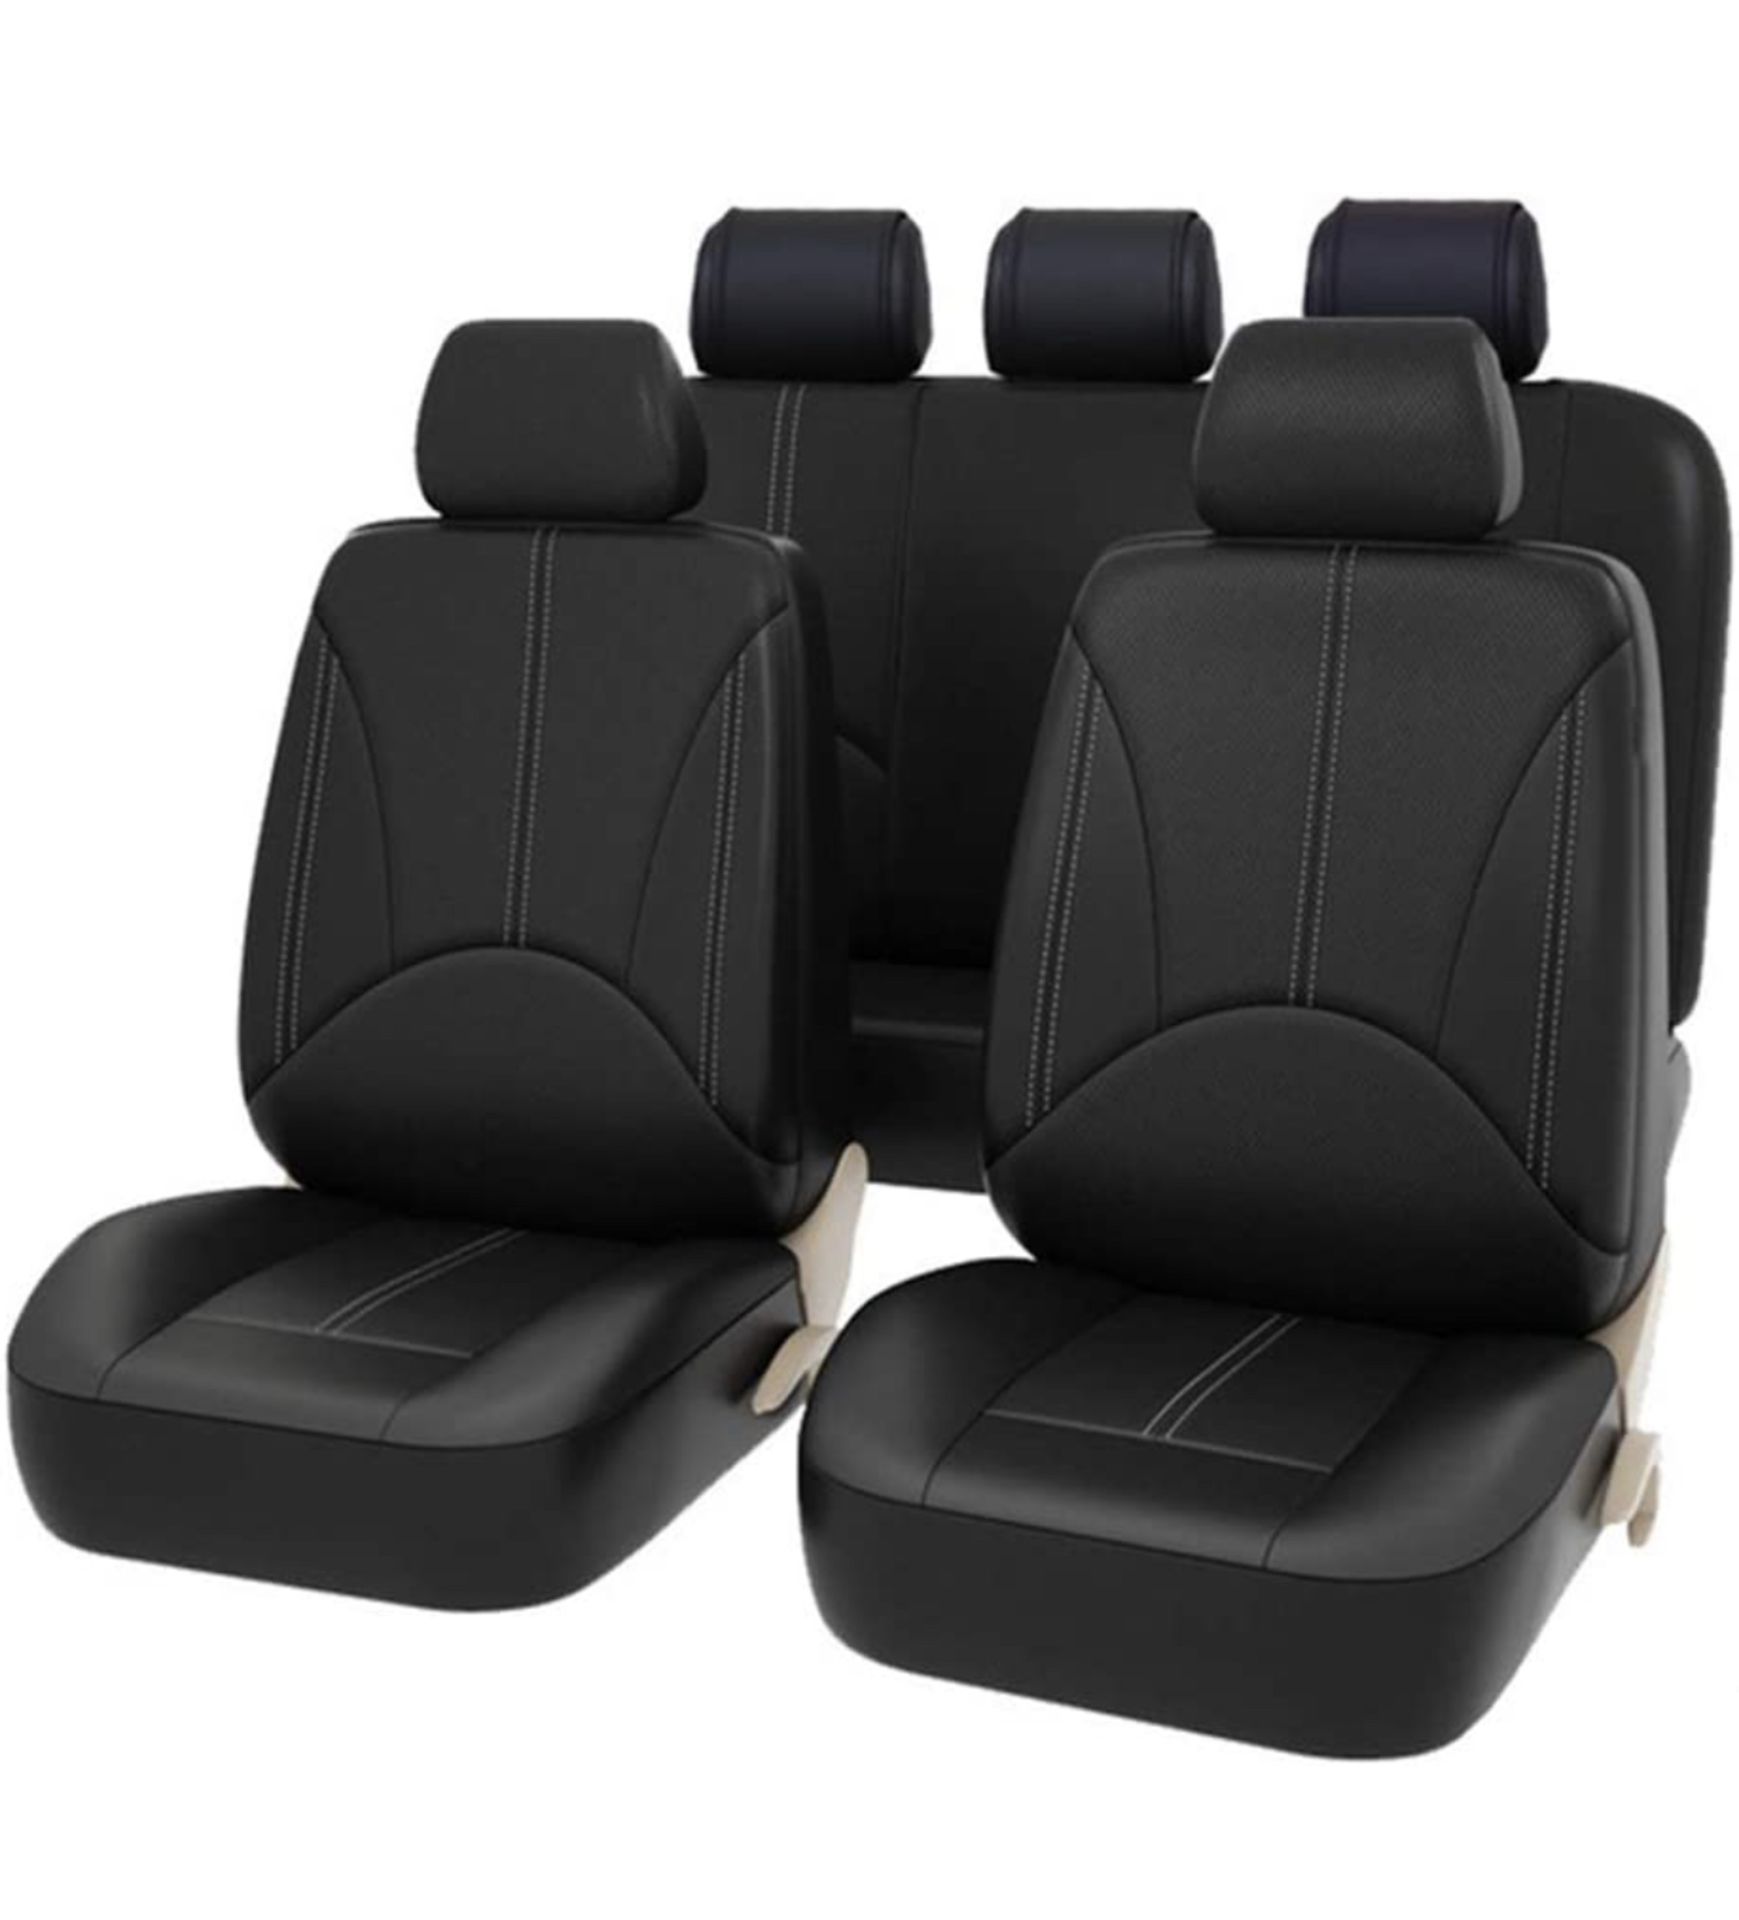 Auto High Premium Faux Leather Car Seat Cover Full Set RRP £59.99